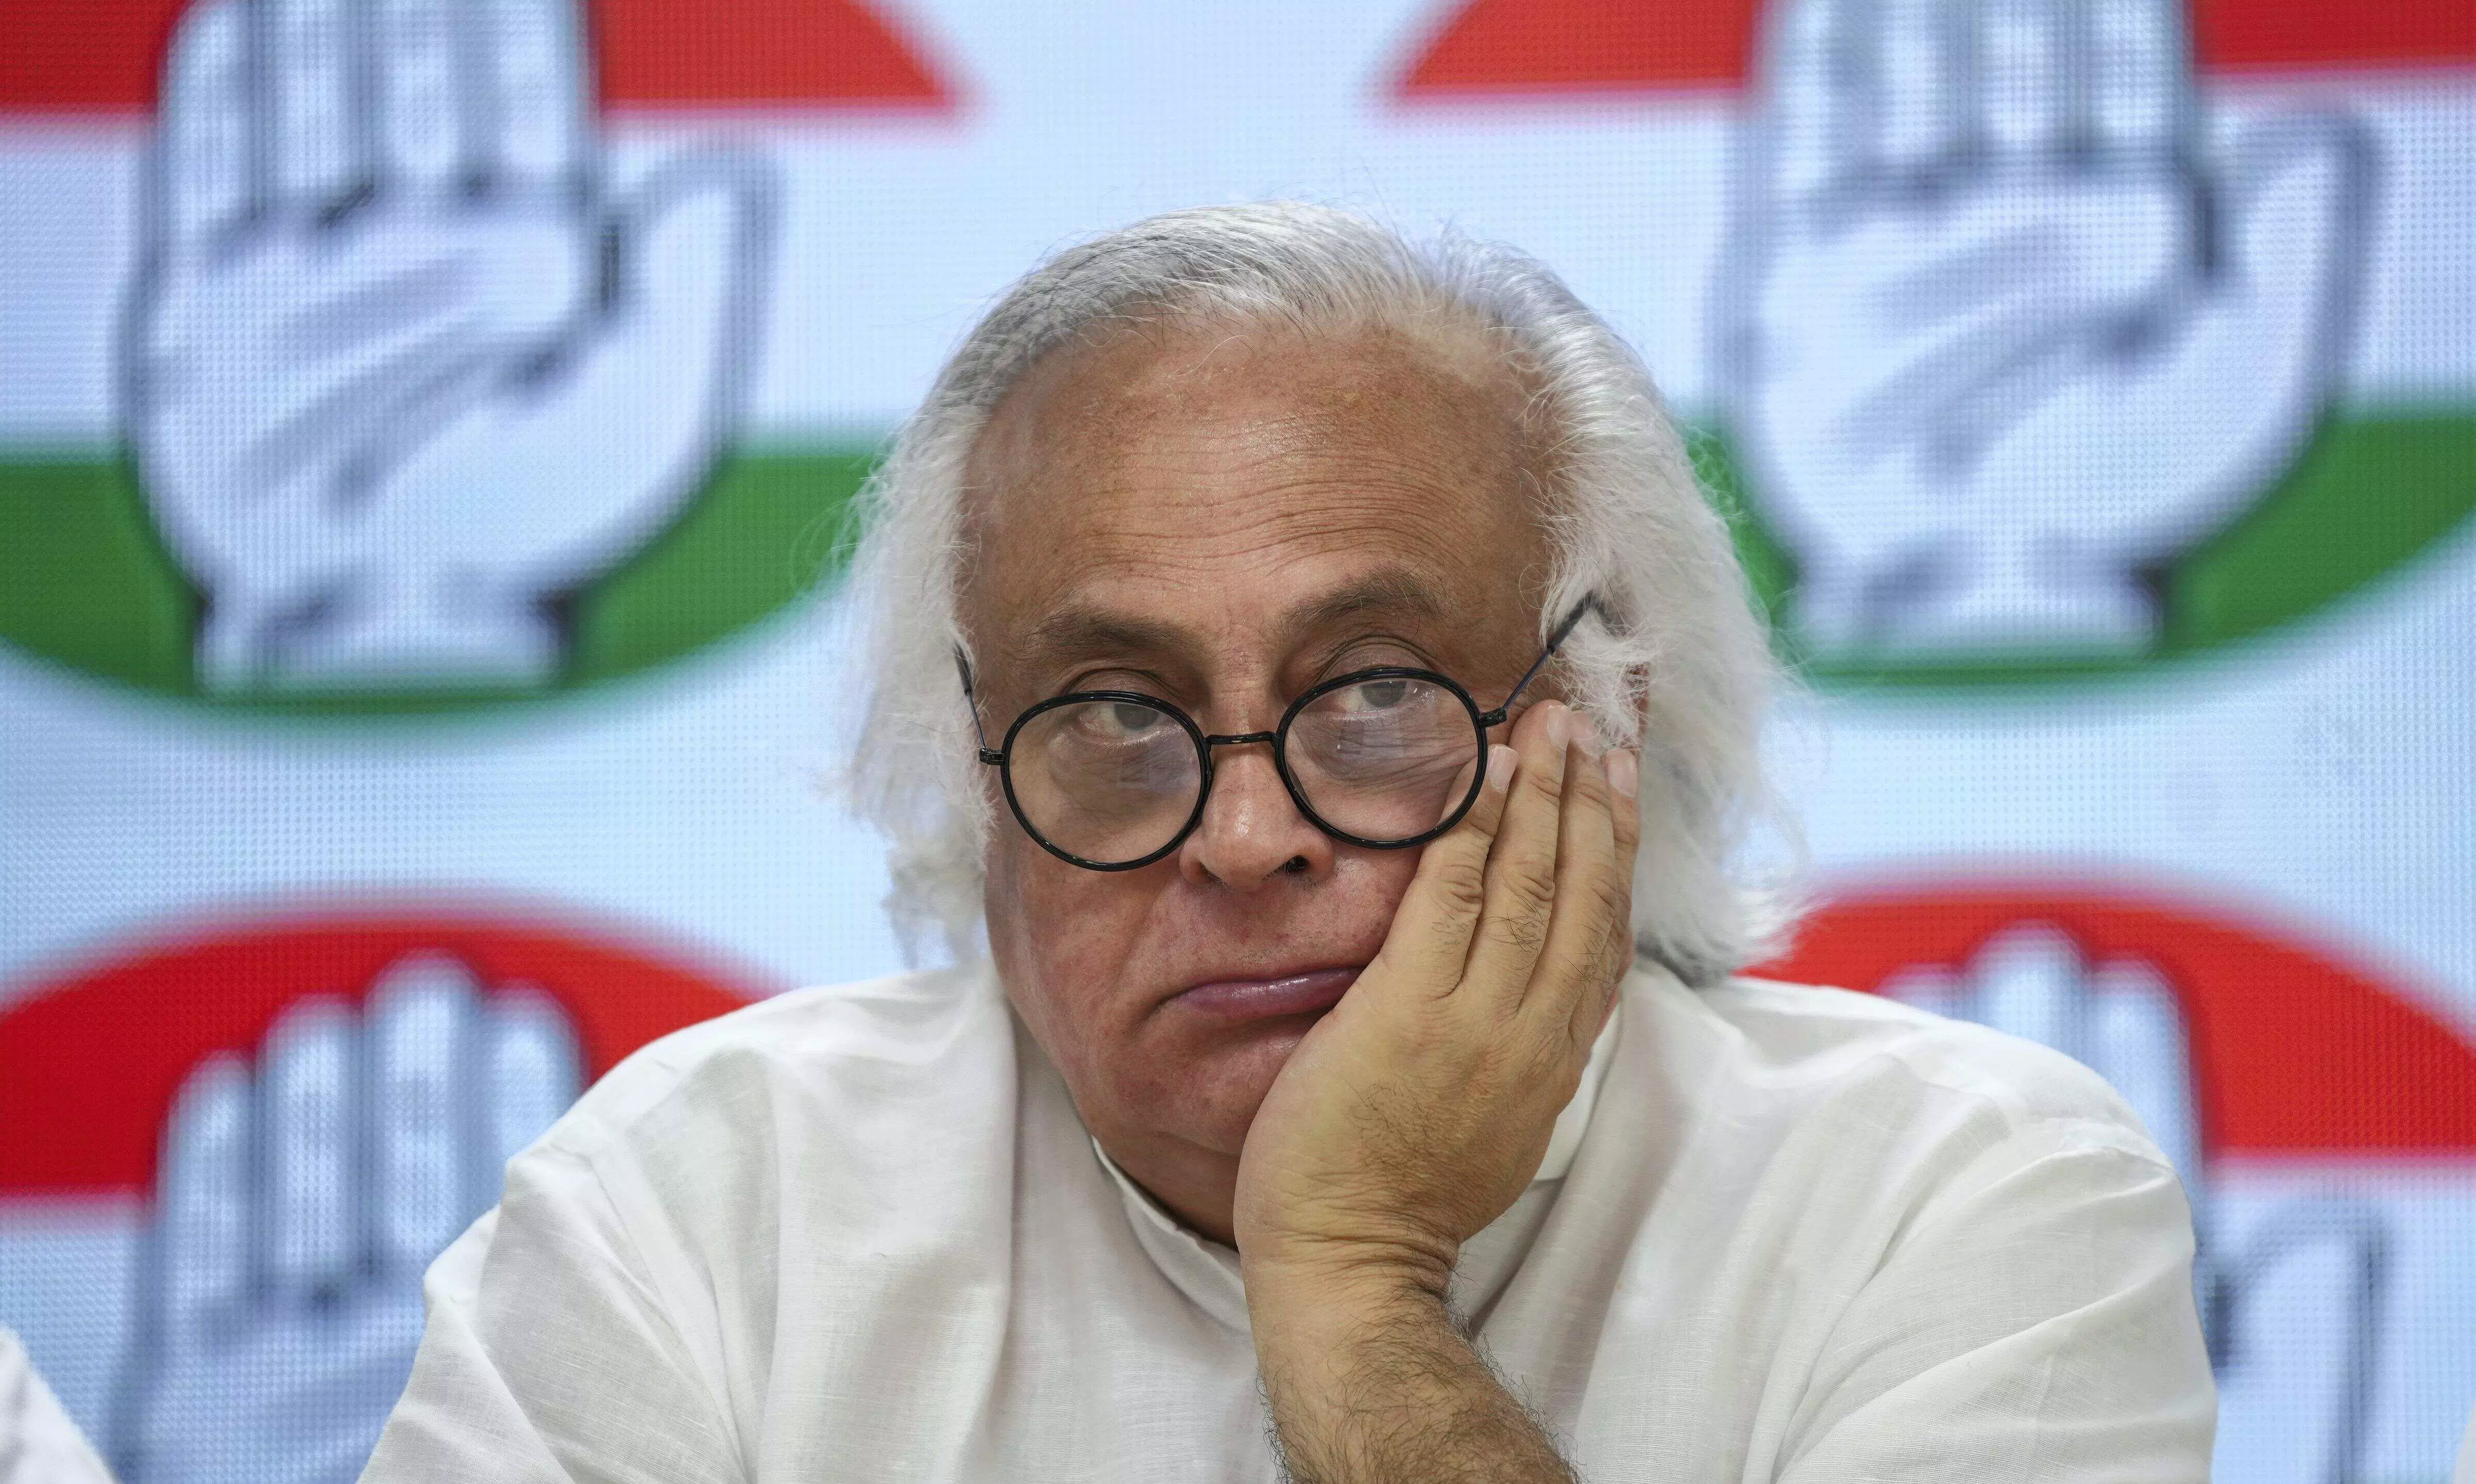 Cong will continue with campaign on greater use of VVPATs: Jairam Ramesh